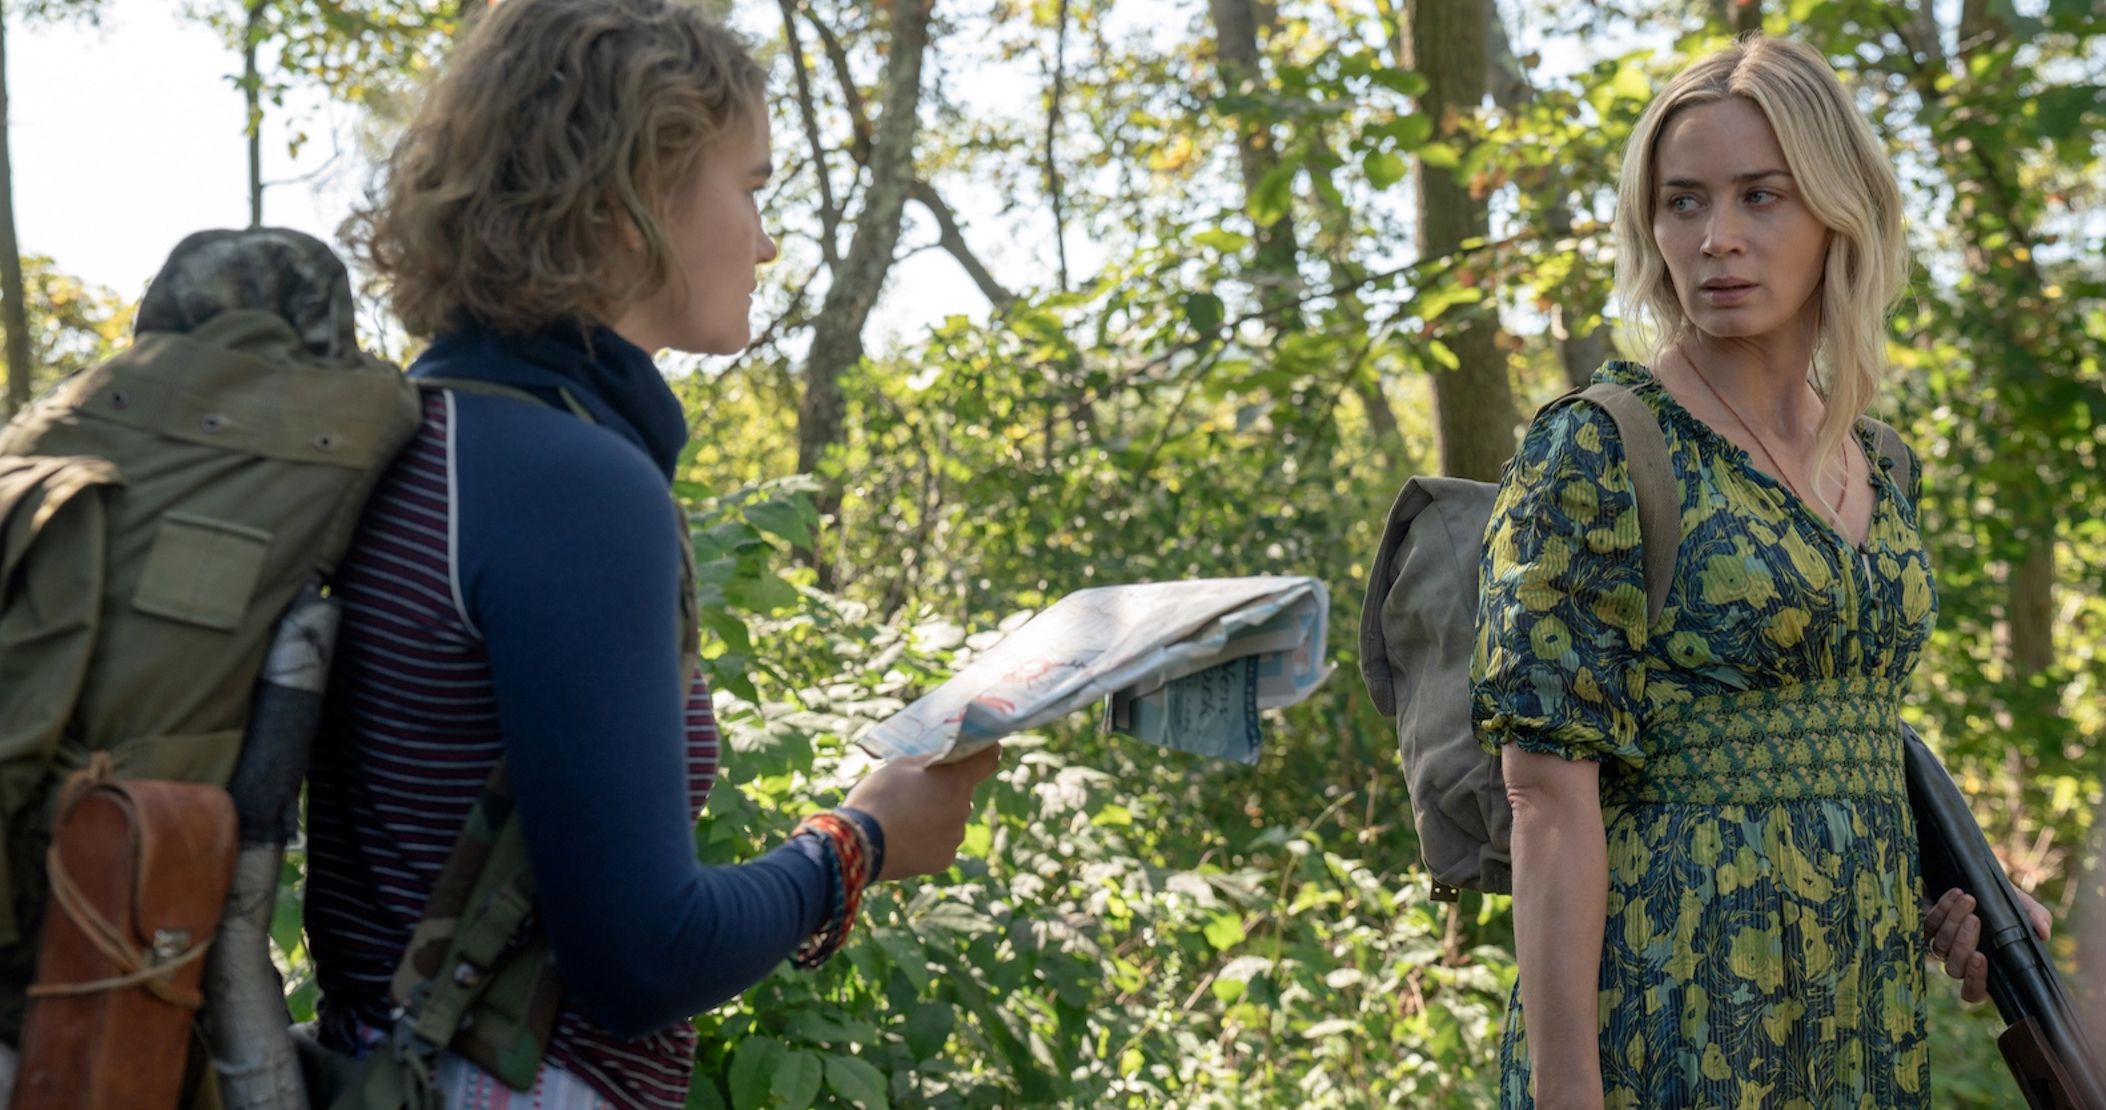 A Quiet Place Part II Is Certified Fresh at Rotten Tomatoes